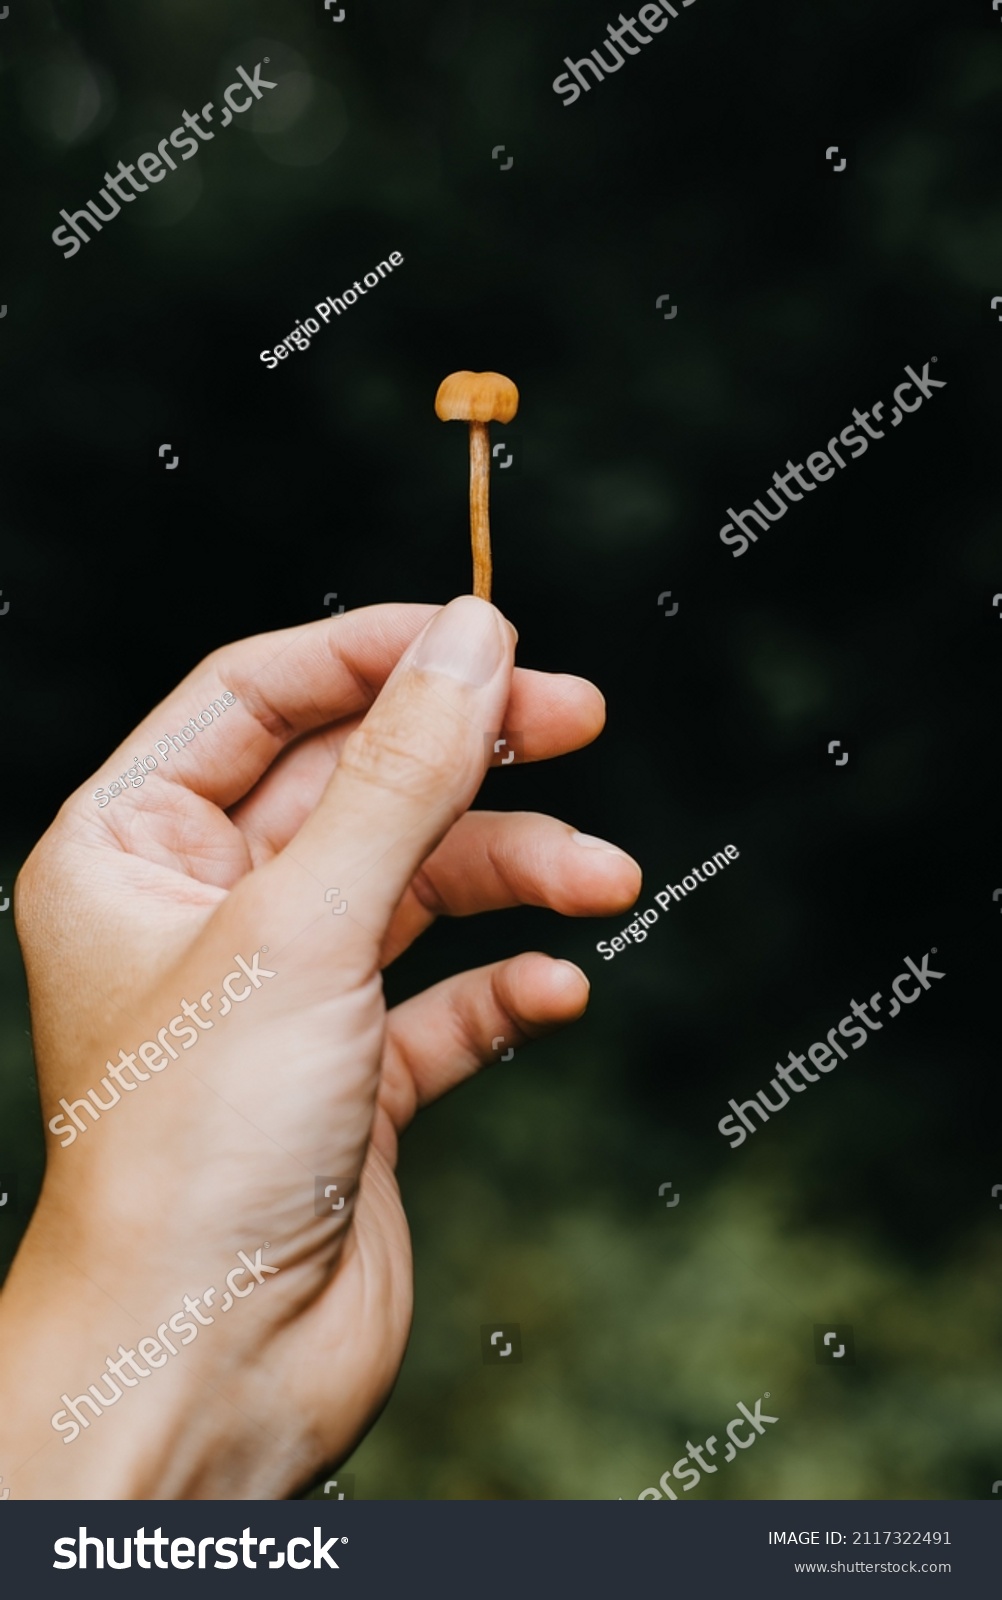 Close-up caucasian hand holding small psilocybin mushroom in forest outdoors. Seasonal collection of golucinogenic dangerous poisonous mushrooms, ethnoscience. #2117322491